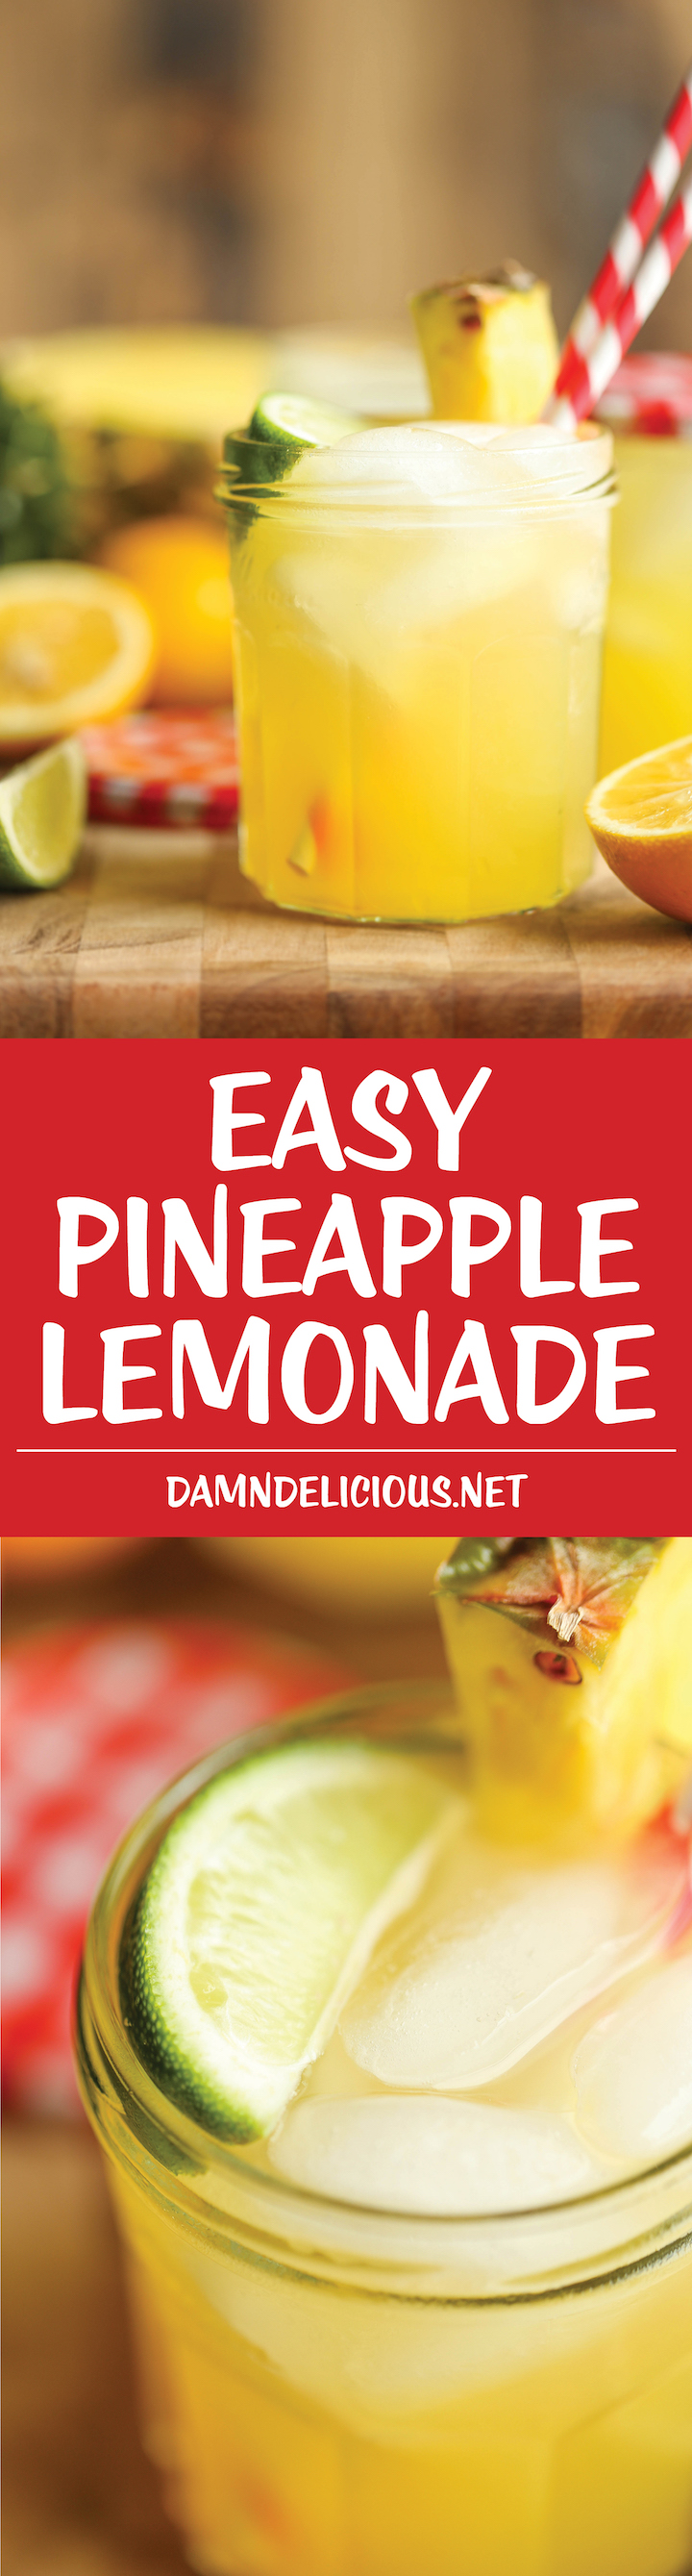 Pineapple Lemonade - So refreshing, so sweet, so tangy and just so wonderfully tropical. It's also unbelievably easy to whip up!